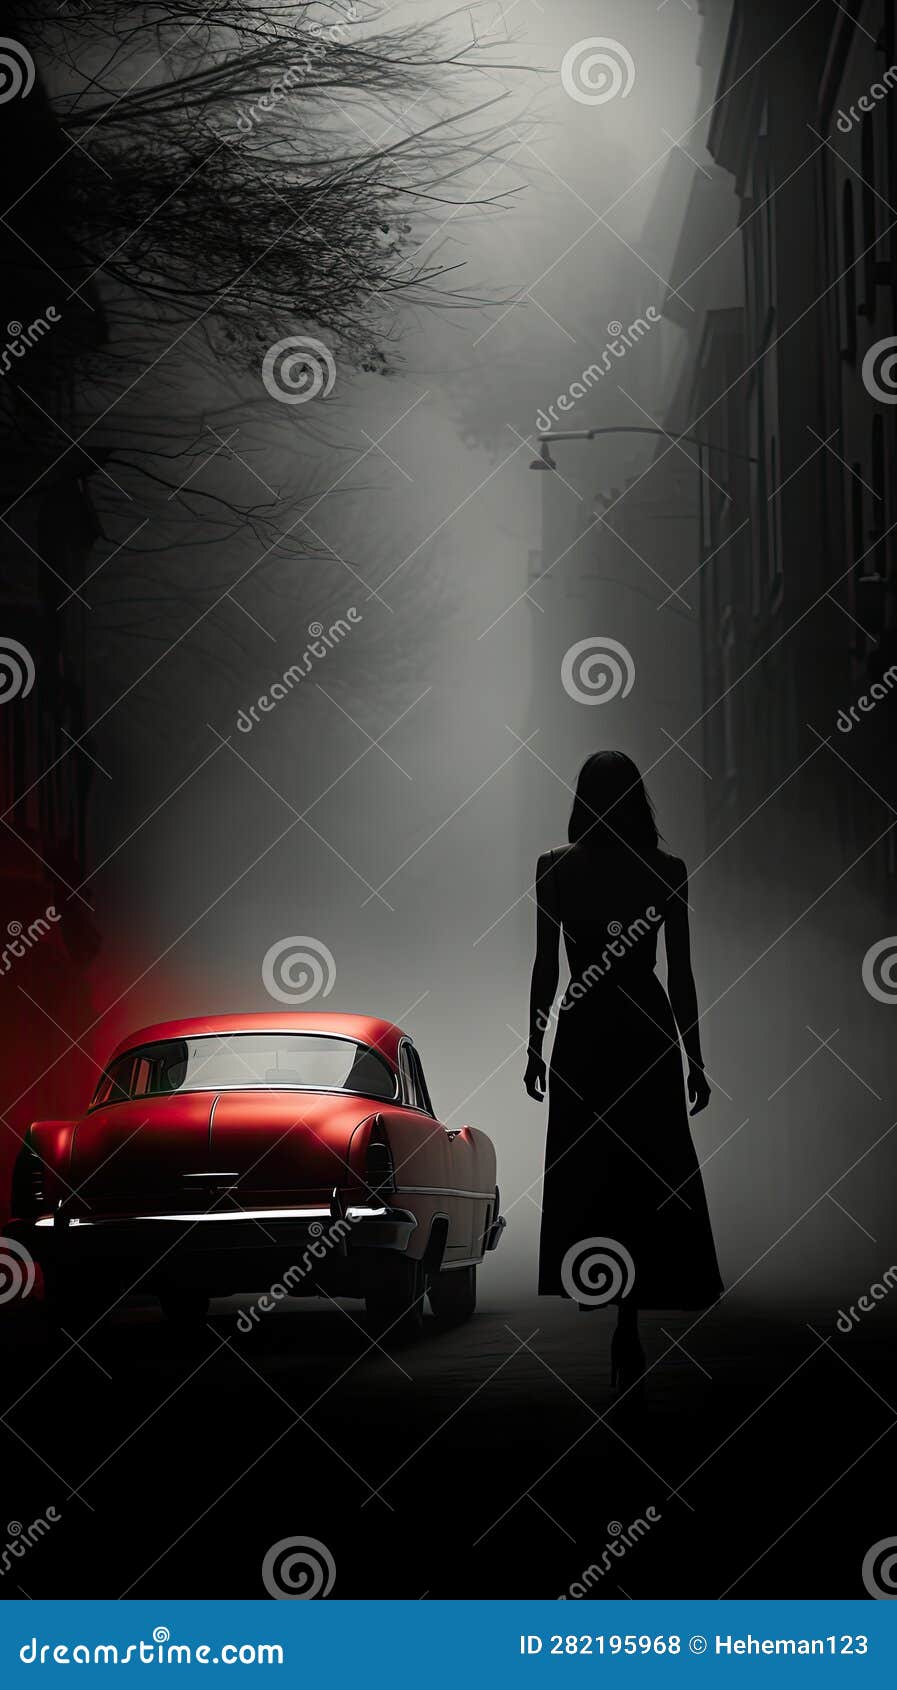 minimalist cinematic surrealism of a woman walking towards a red car that flashes in the dark